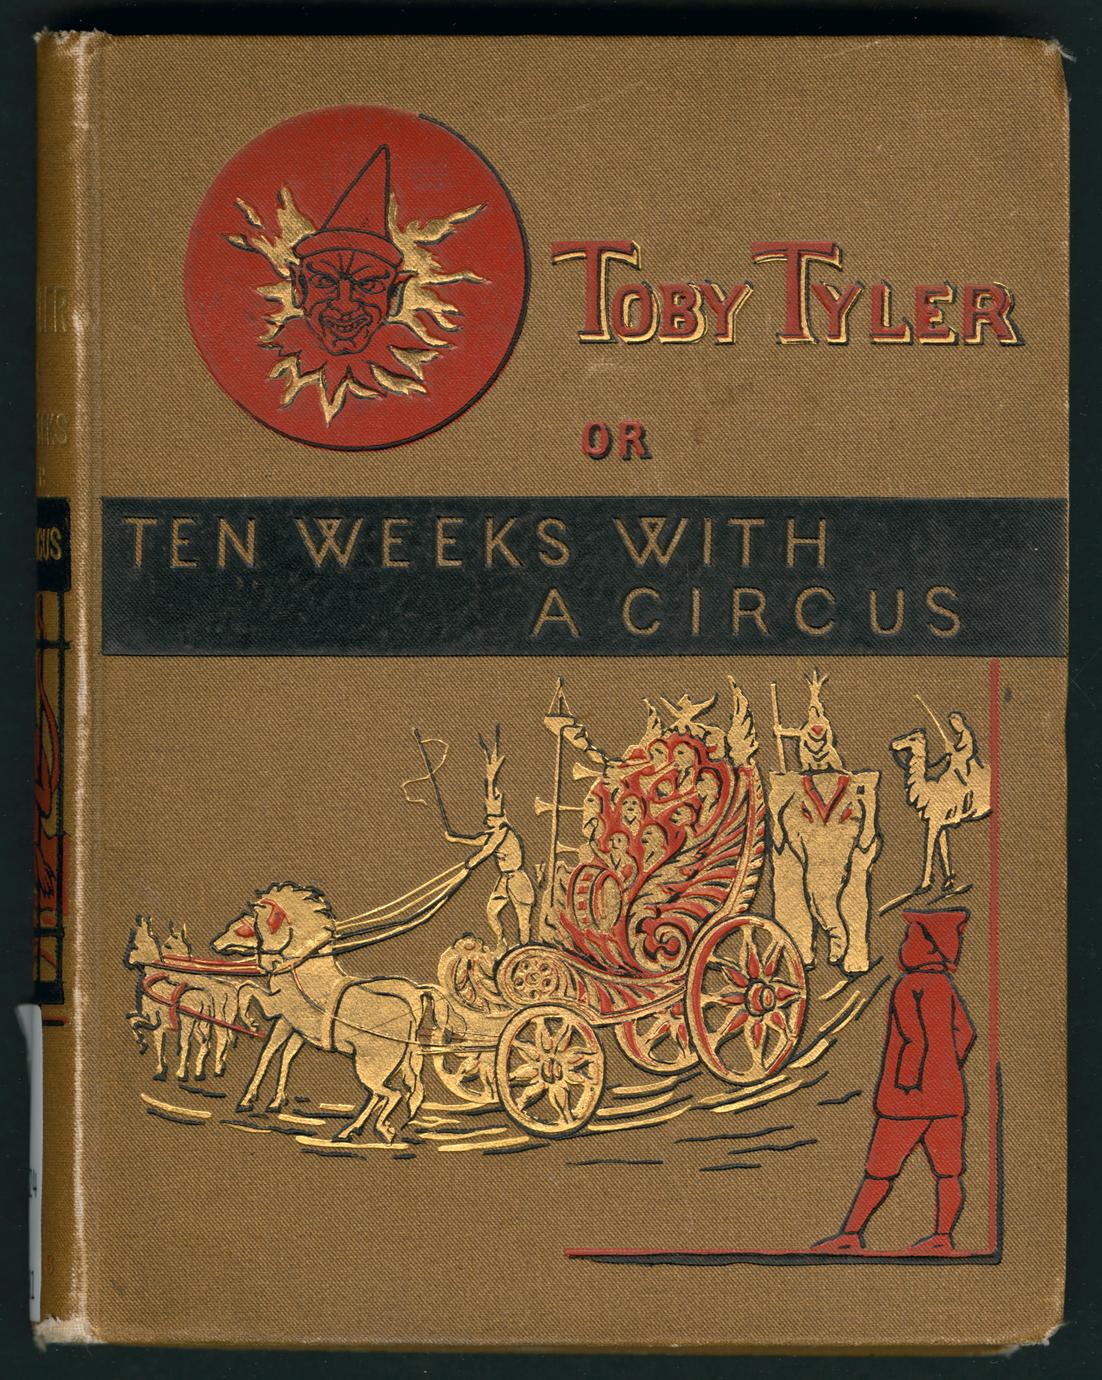 Toby Tyler : or, Ten weeks with a circus (1 of 2)